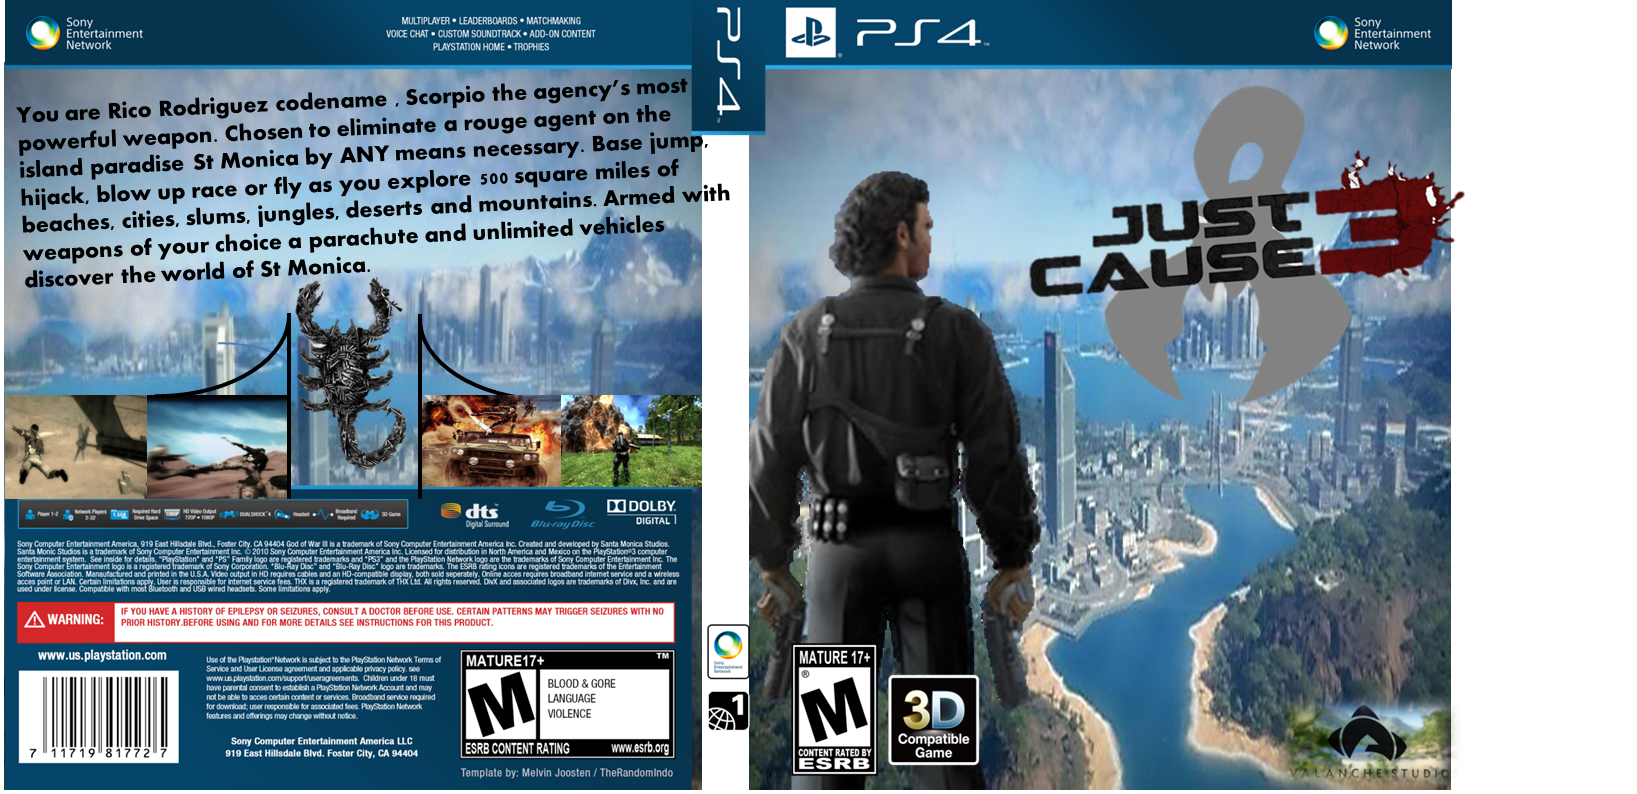 Just cause 3 box cover